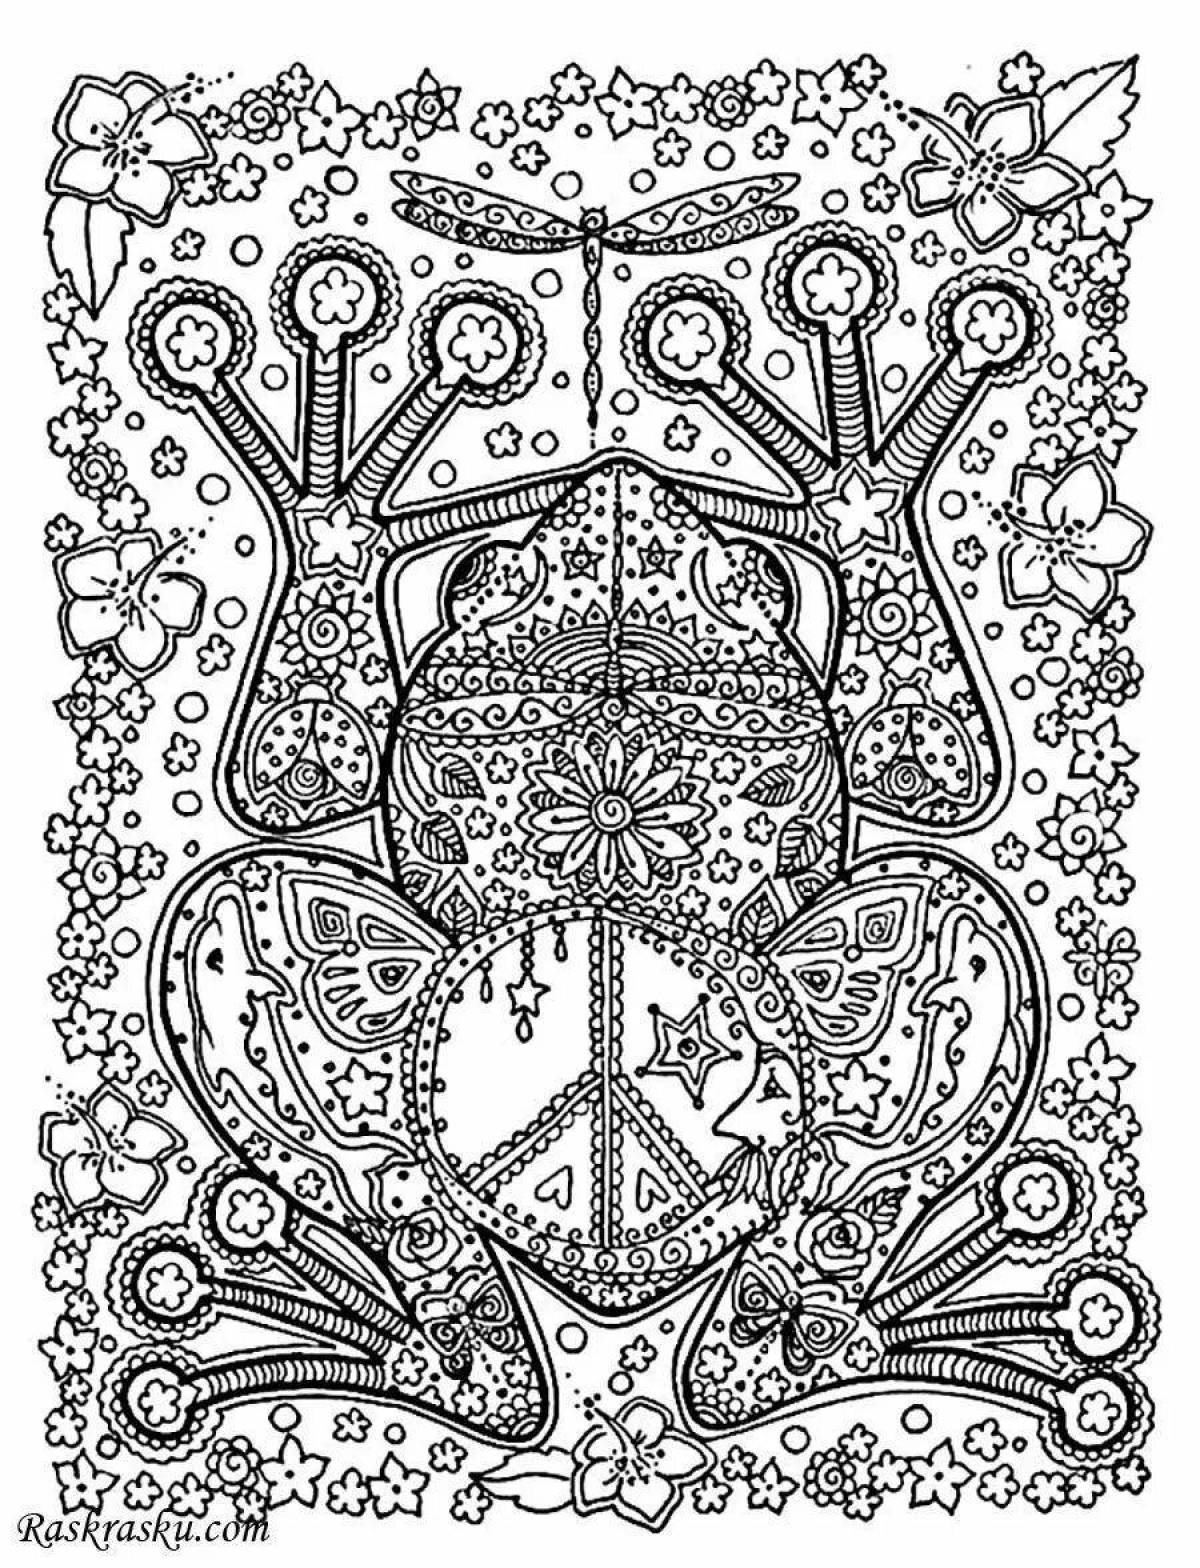 Cheerful psychological anti-stress coloring book